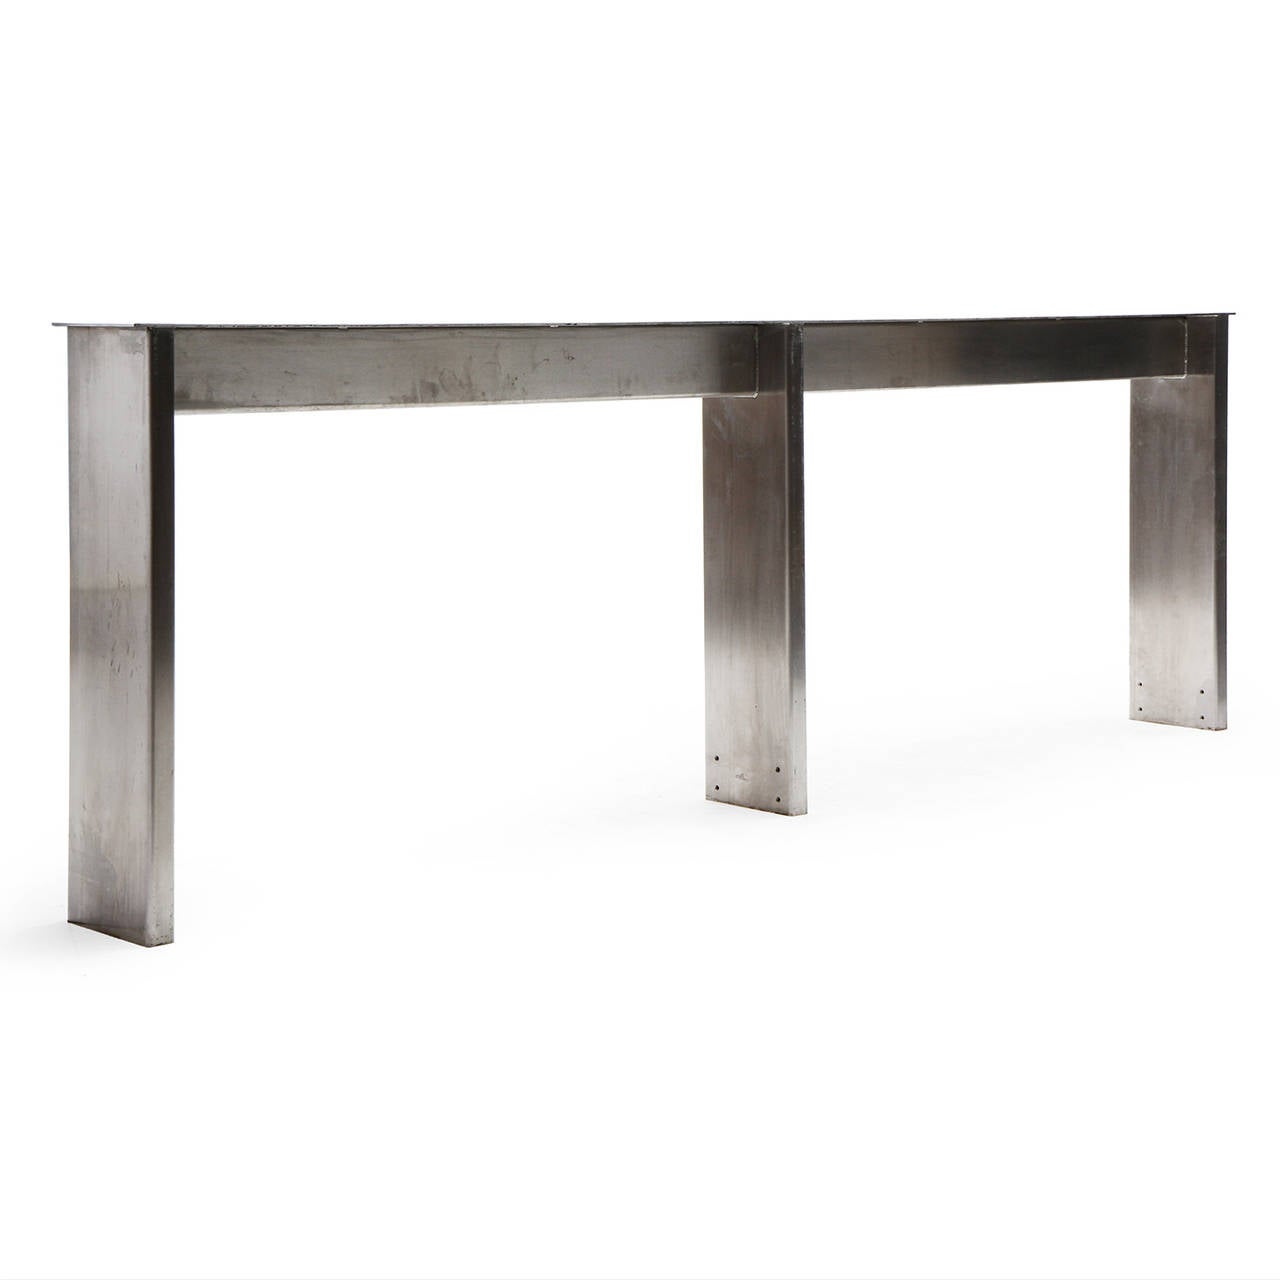 A masterfully fabricated, architectural and generously scaled rectilinear polished steel long and low table from New York's Yankee Stadium.